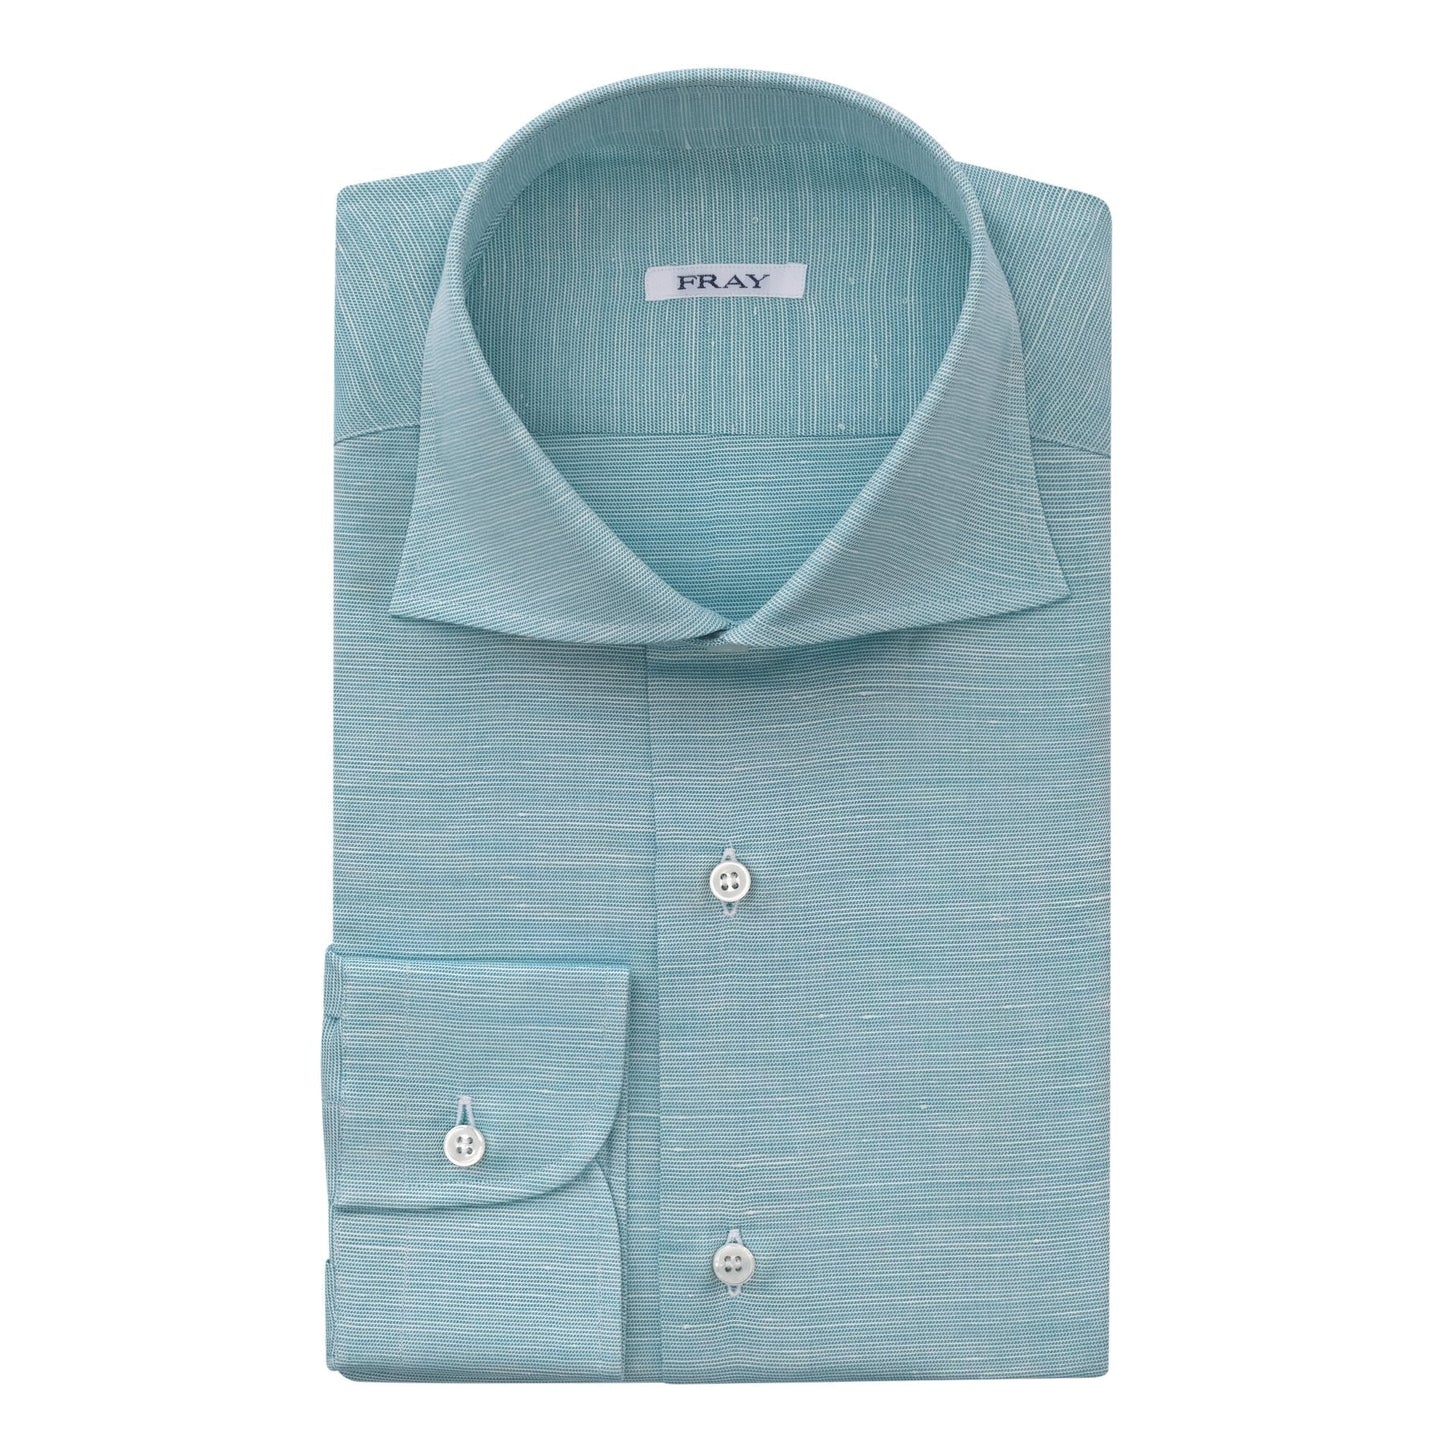 Fray Cotton and Hemp-Blend Ocean Blue Shirt with Round French Cuff - SARTALE